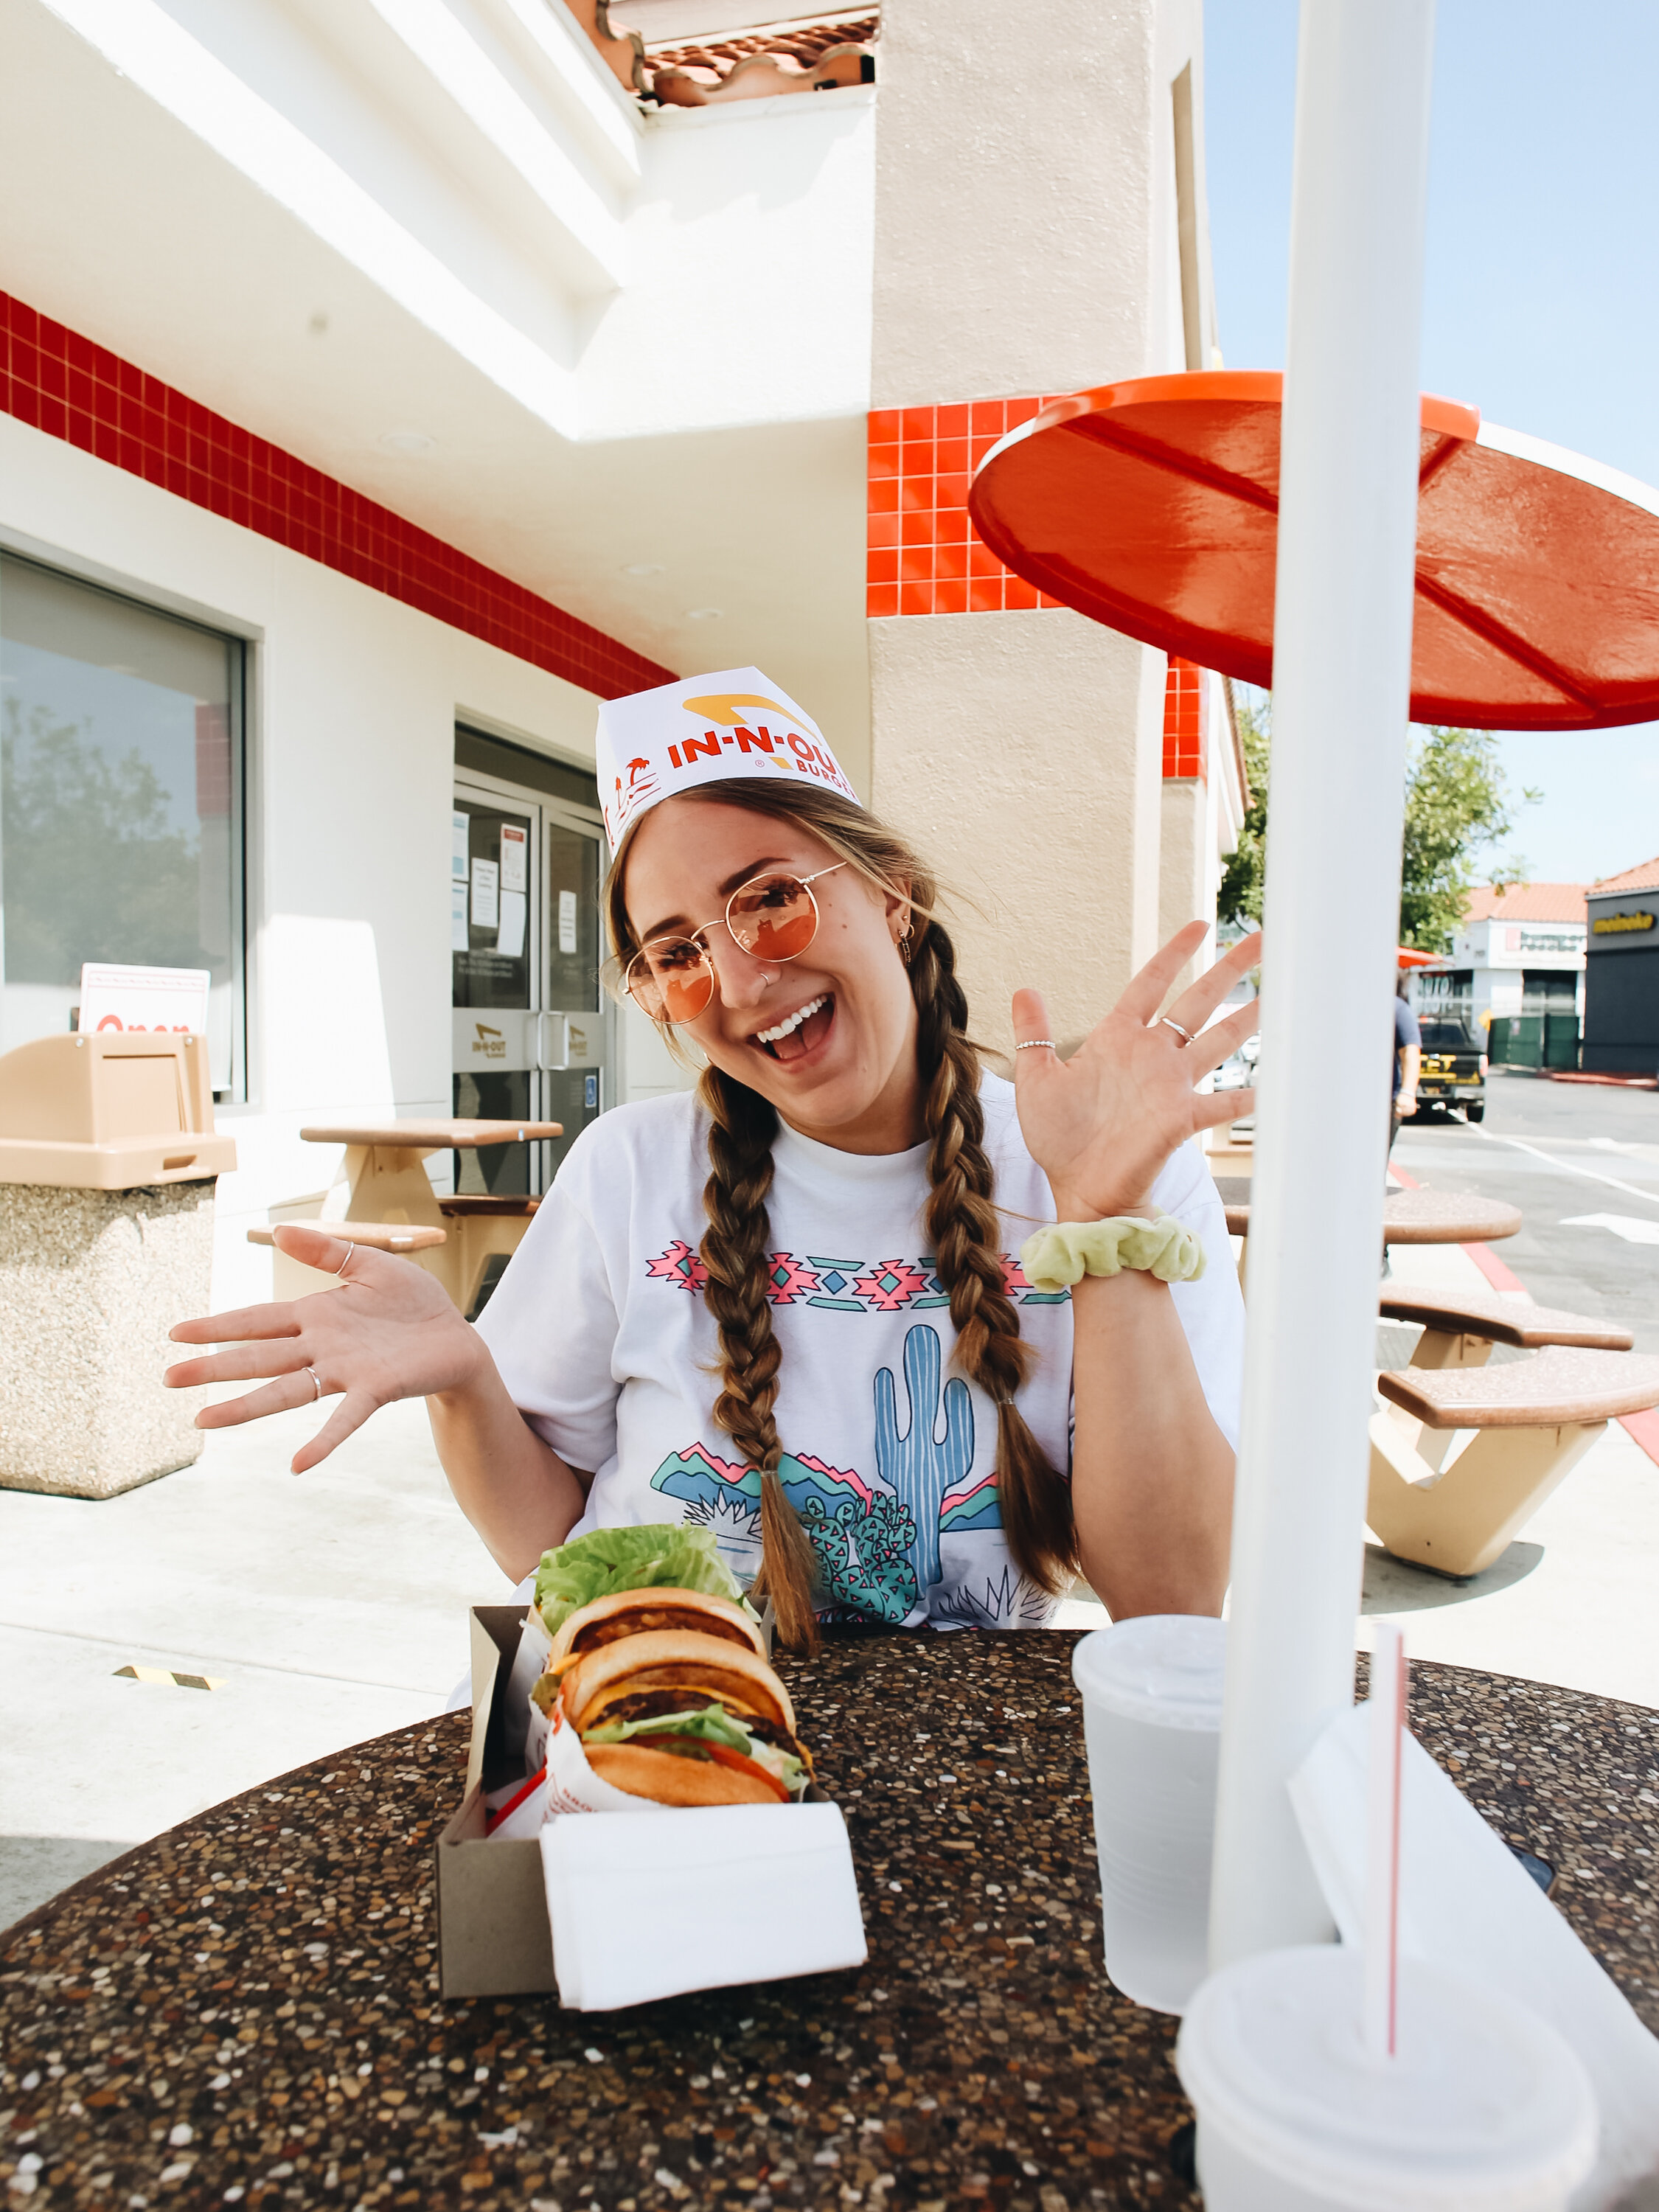 Try the Infamous California In-n-out Burgers